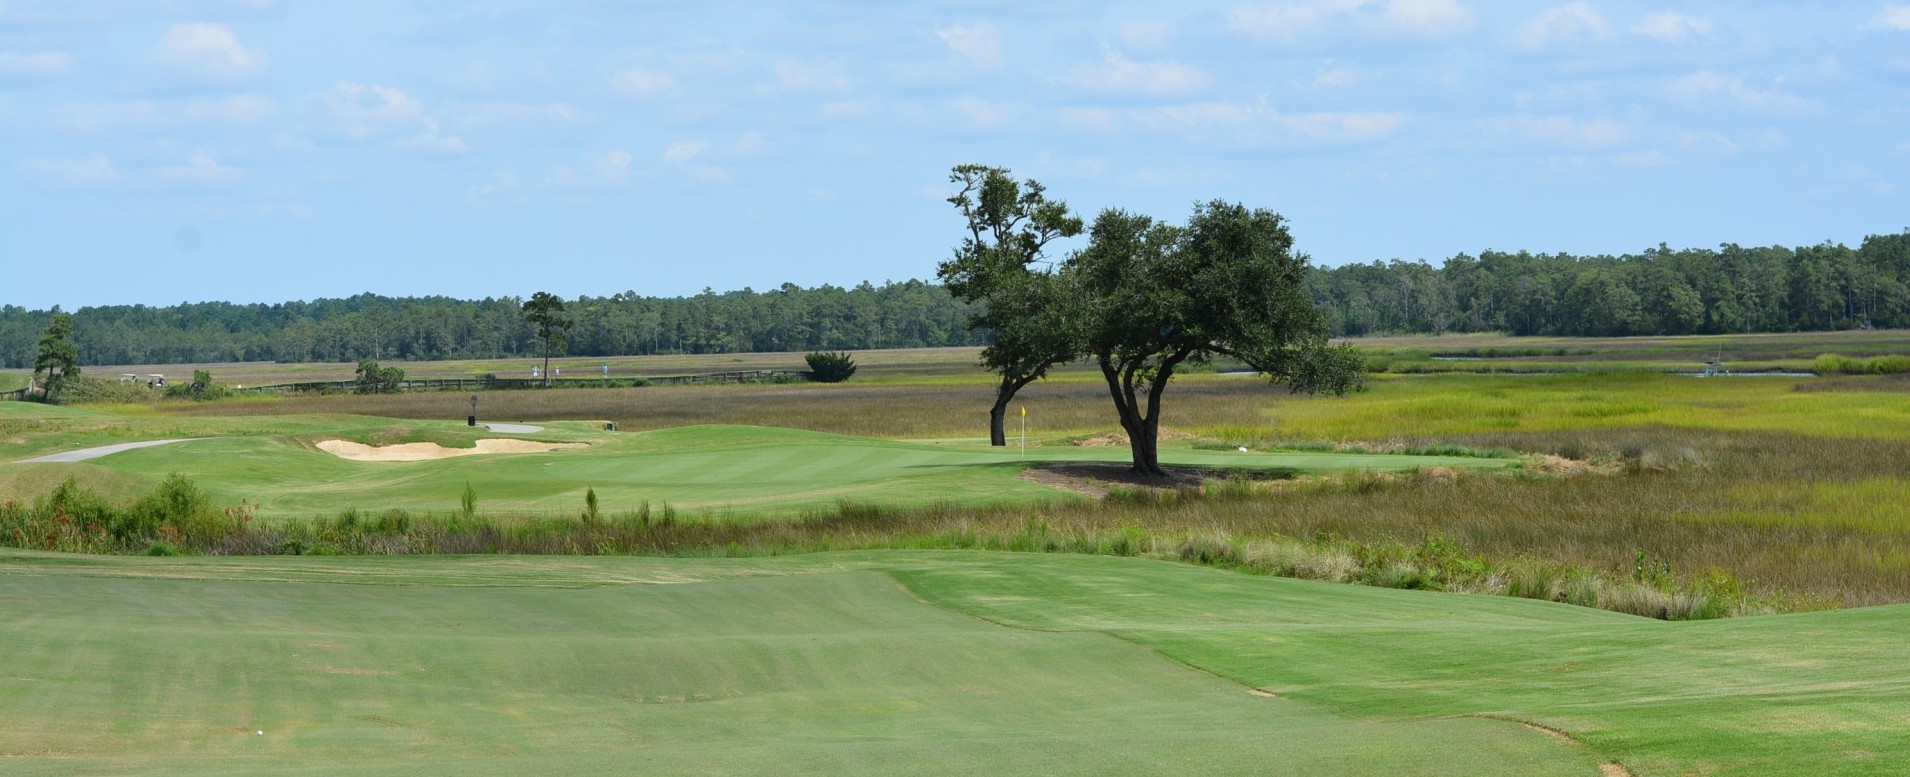 Golf Vacation Package - Myrtle Beach Golf Trail Promos for Every Season & Budget!